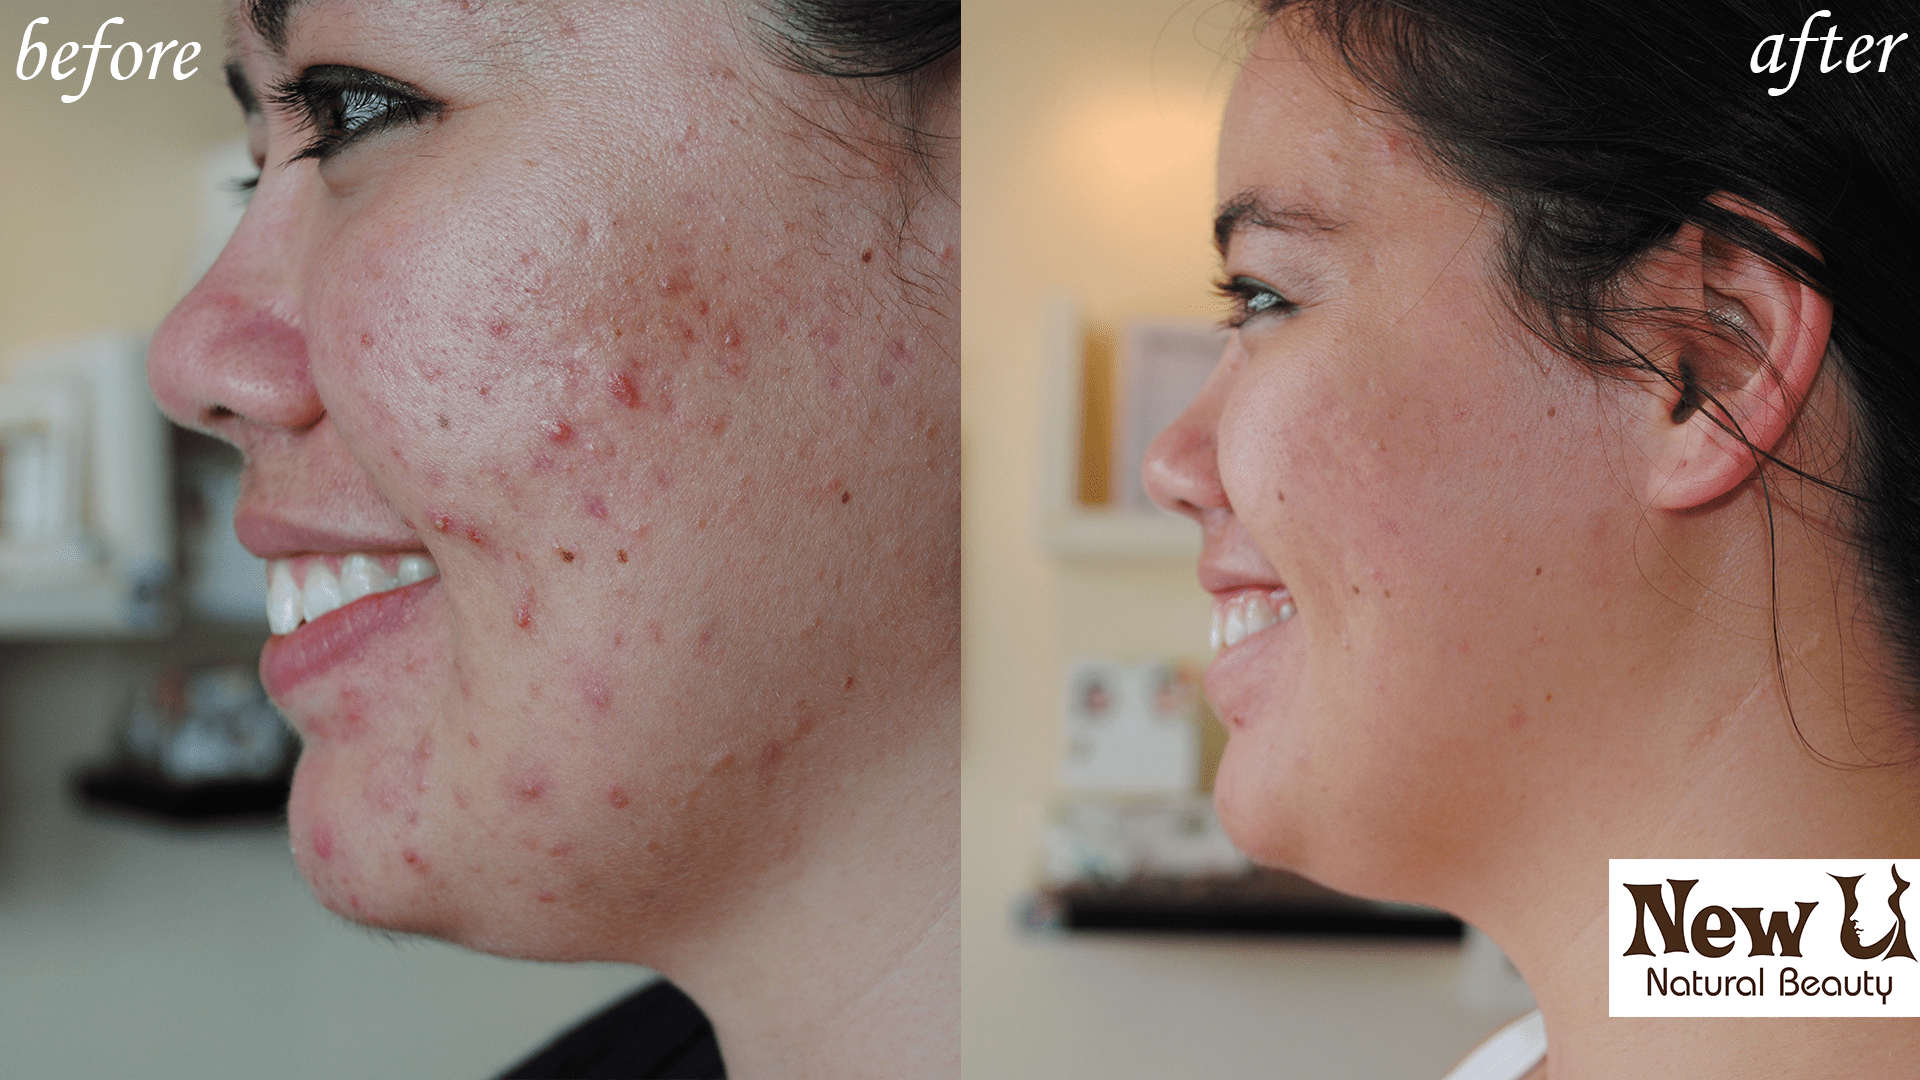 Acne Treatment 3 Las Vegas Before and After